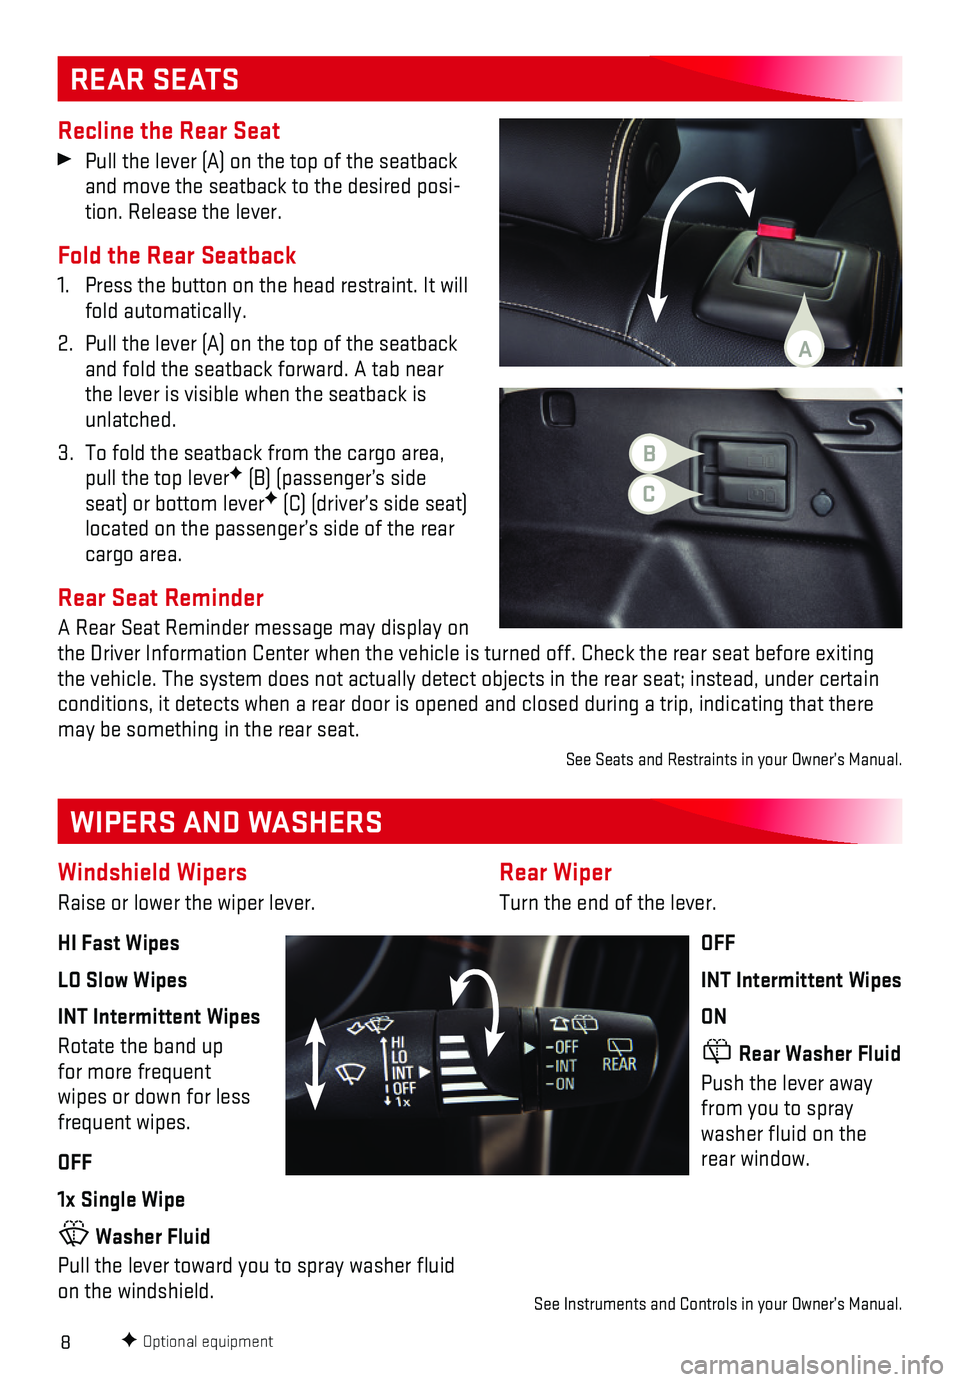 GMC TERRAIN 2018  Get To Know Guide 8
Rear Wiper
Turn the end of the lever.
OFF
INT Intermittent Wipes
ON
 Rear Washer Fluid
Push the lever away from you to spray washer fluid on the rear window.
 See Instruments and Controls in your Ow